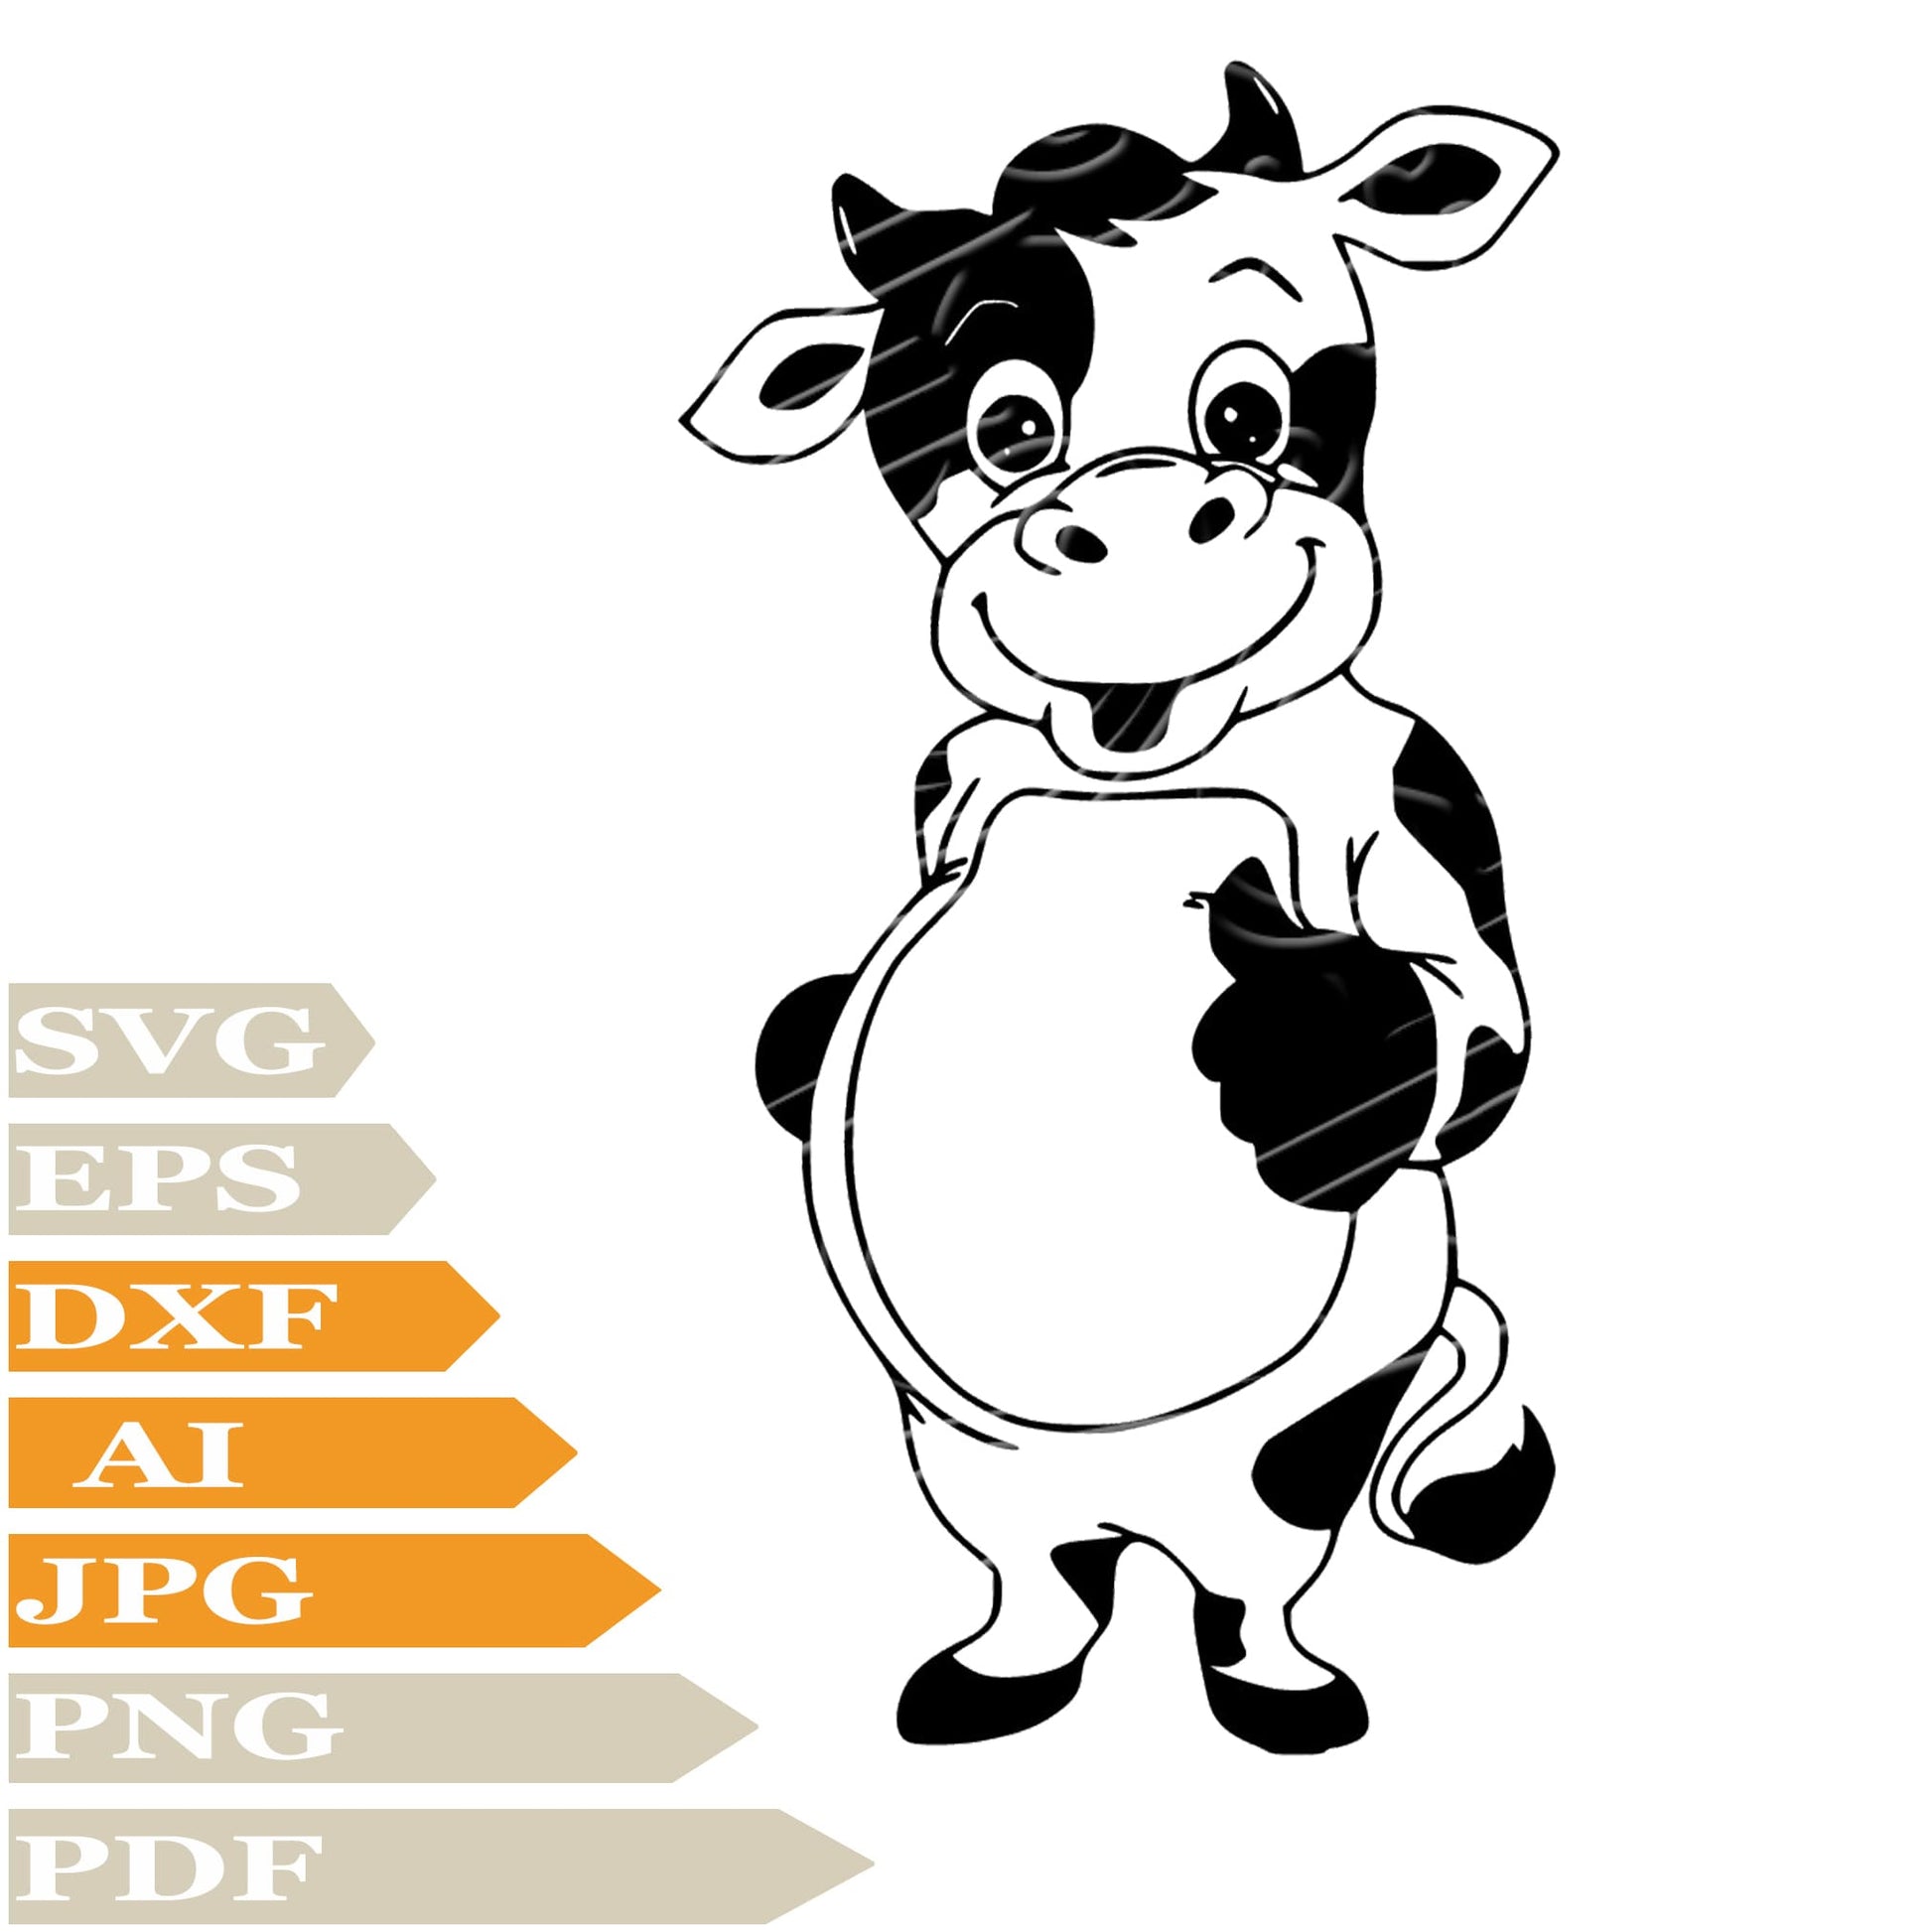 Cow Svg File, Funny Cow Svg Design, Baby Cow Png, Wild Animals Svg File, Funny Cow Vector Graphics, Baby Cow Svg For Tattoo, Cow Svg For Cricut